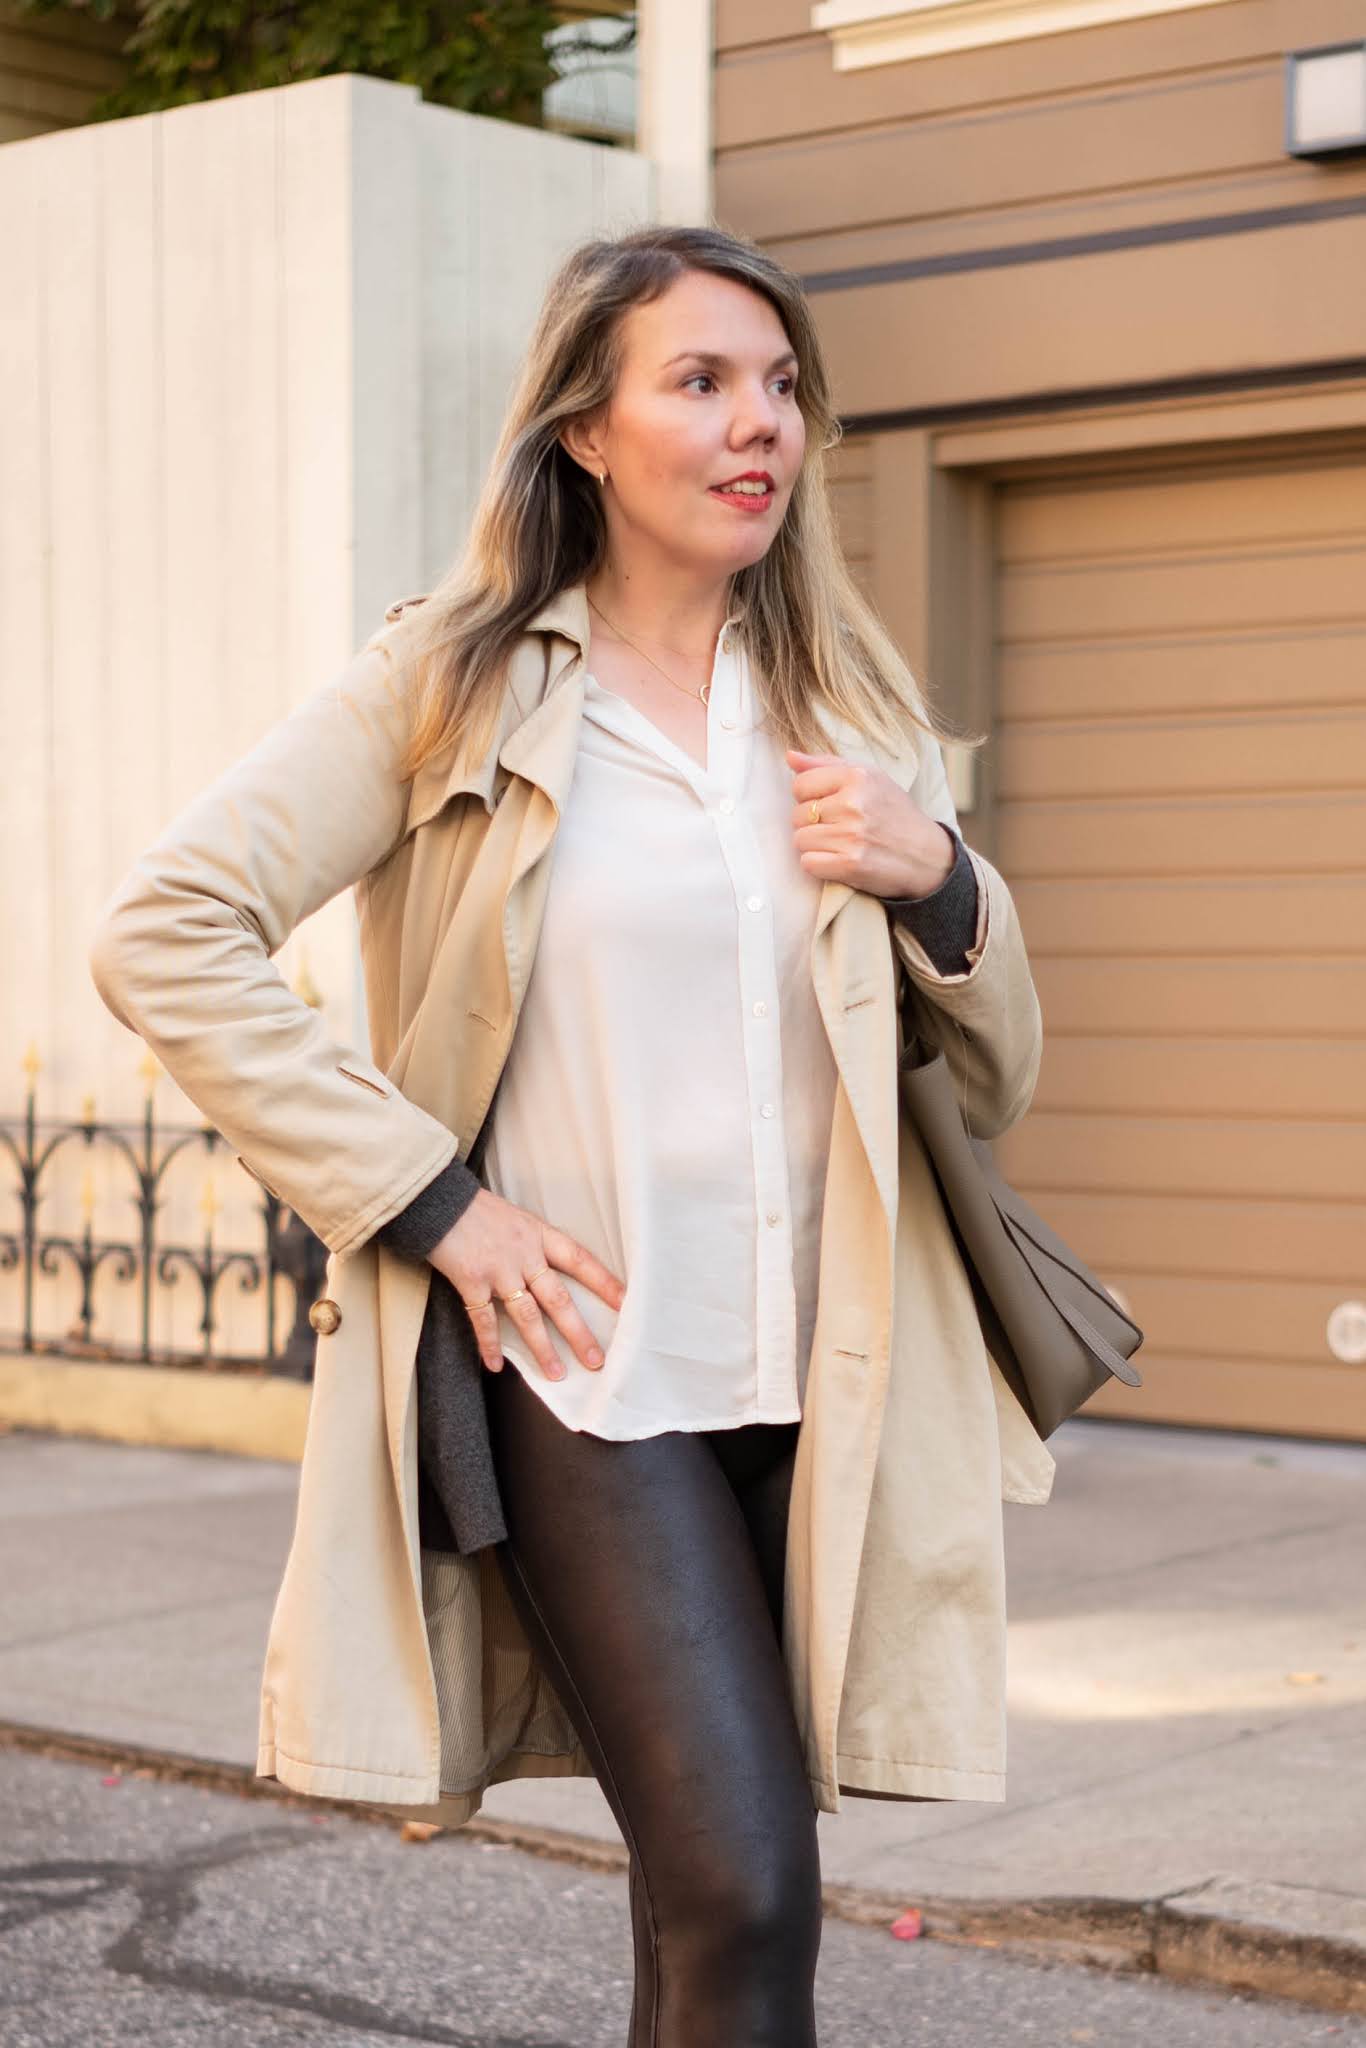 An honest review of Spanx faux leather leggings - Cheryl Shops